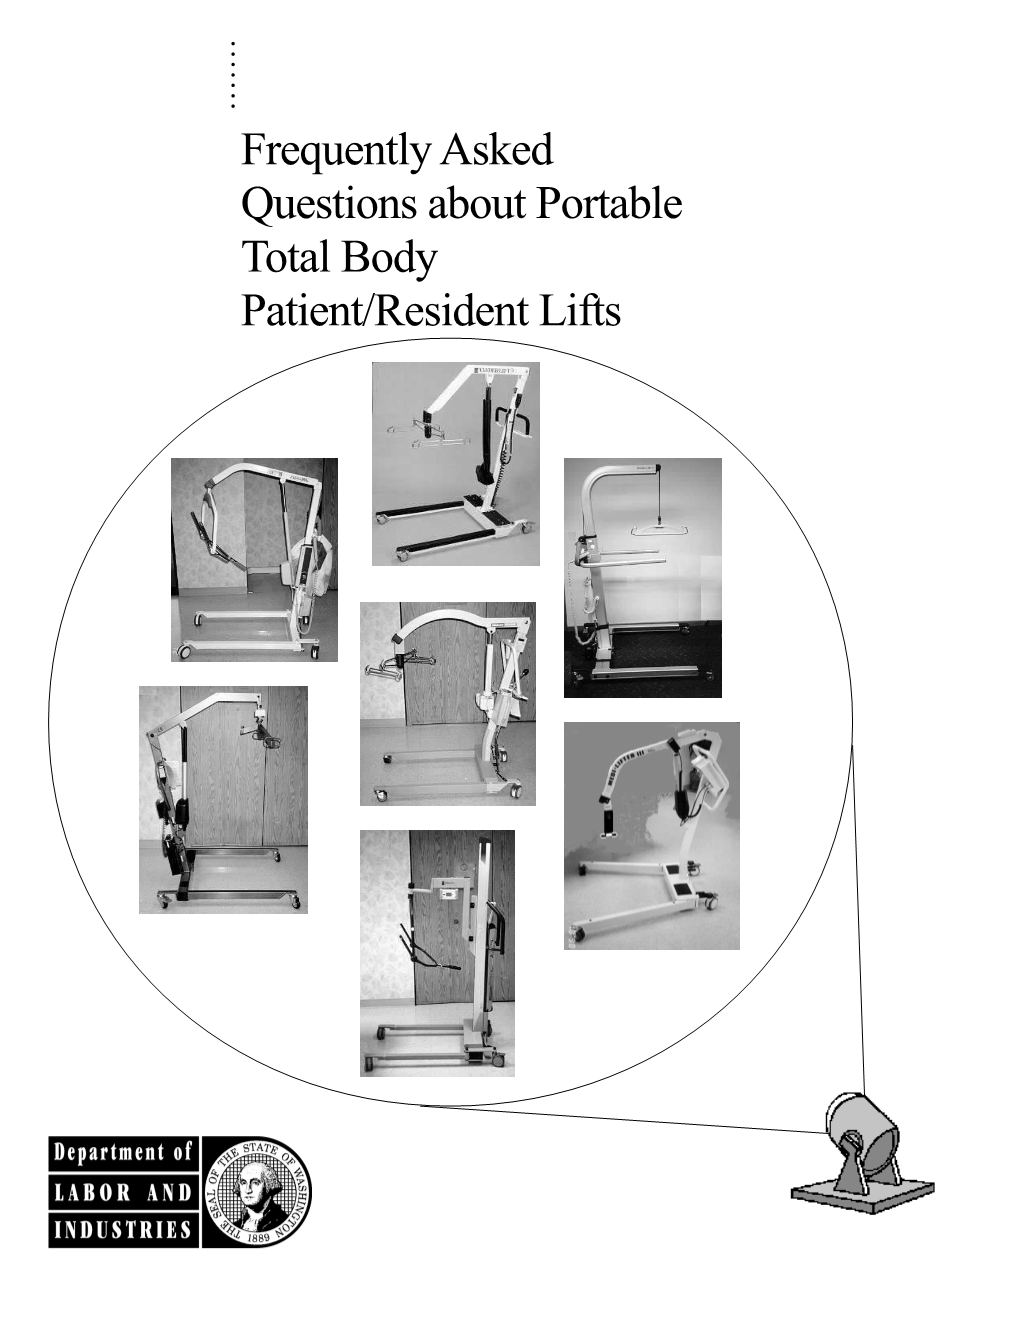 Frequently Asked Questions About Portable Total Body Patient/Resident Lifts